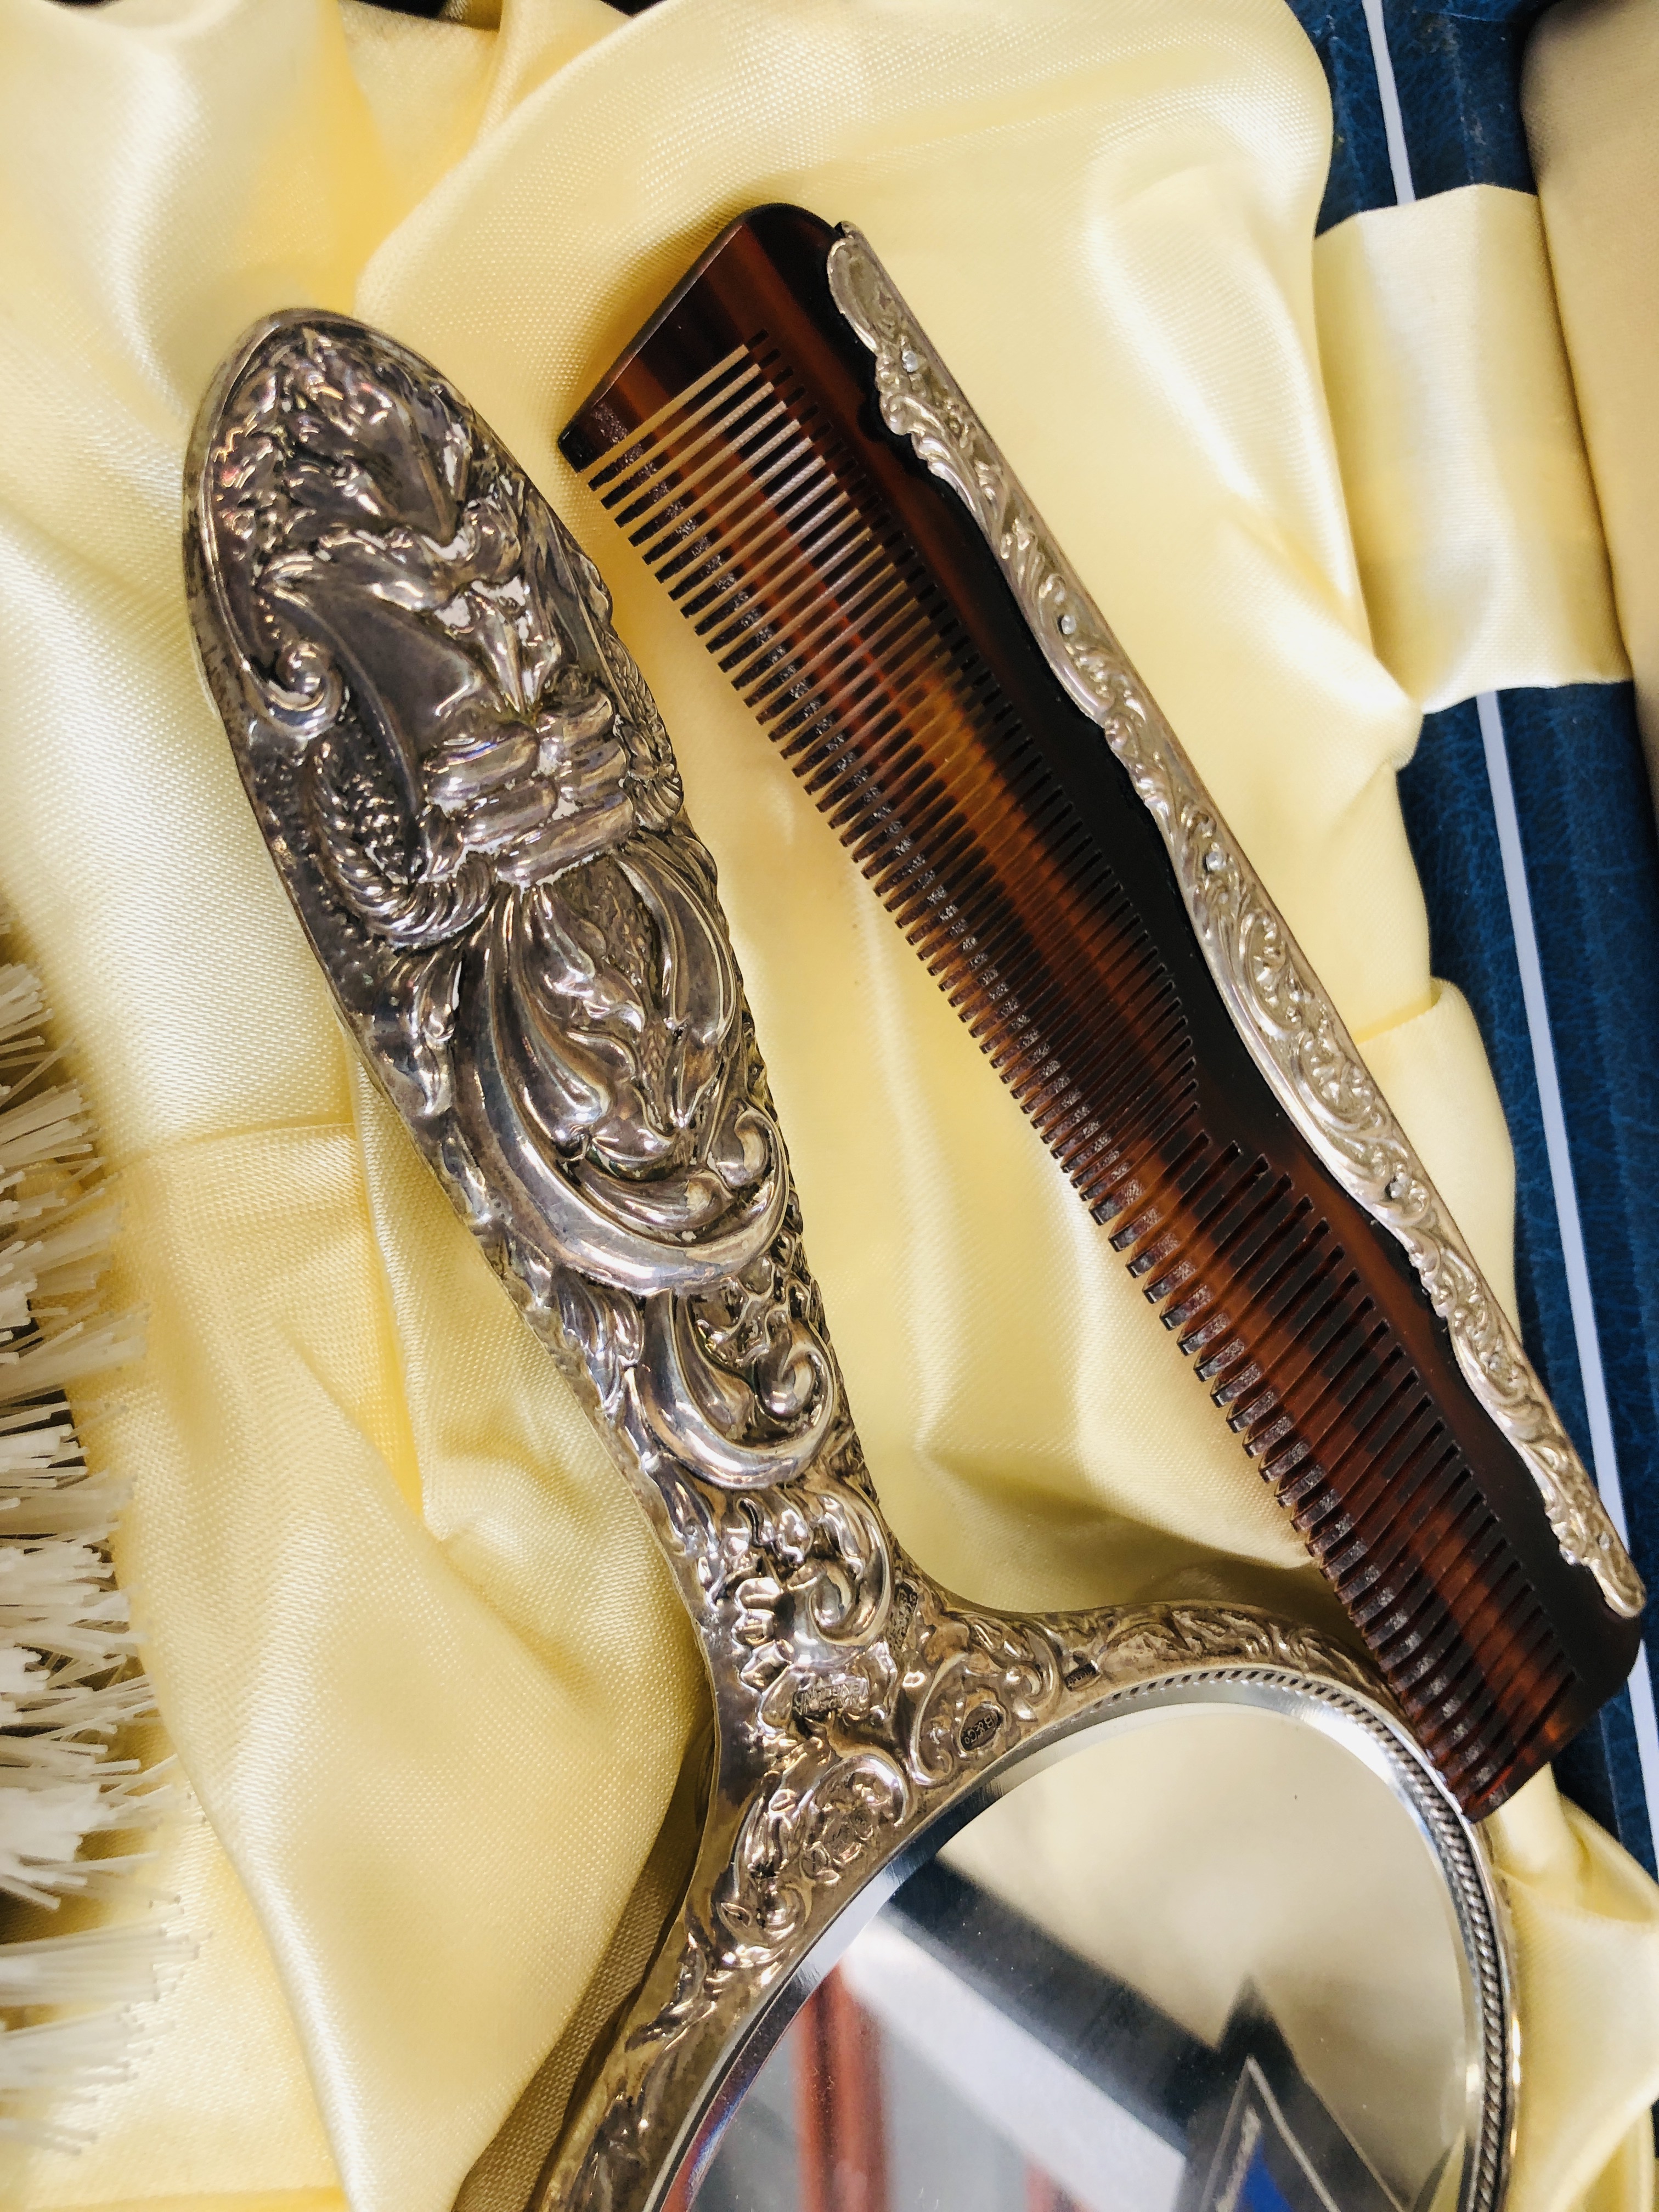 A VINTAGE 3 PIECE CASED SILVER BACKED BRUSH SET (COMPRISING MIRROR, BRUSH AND COMB). - Image 10 of 12